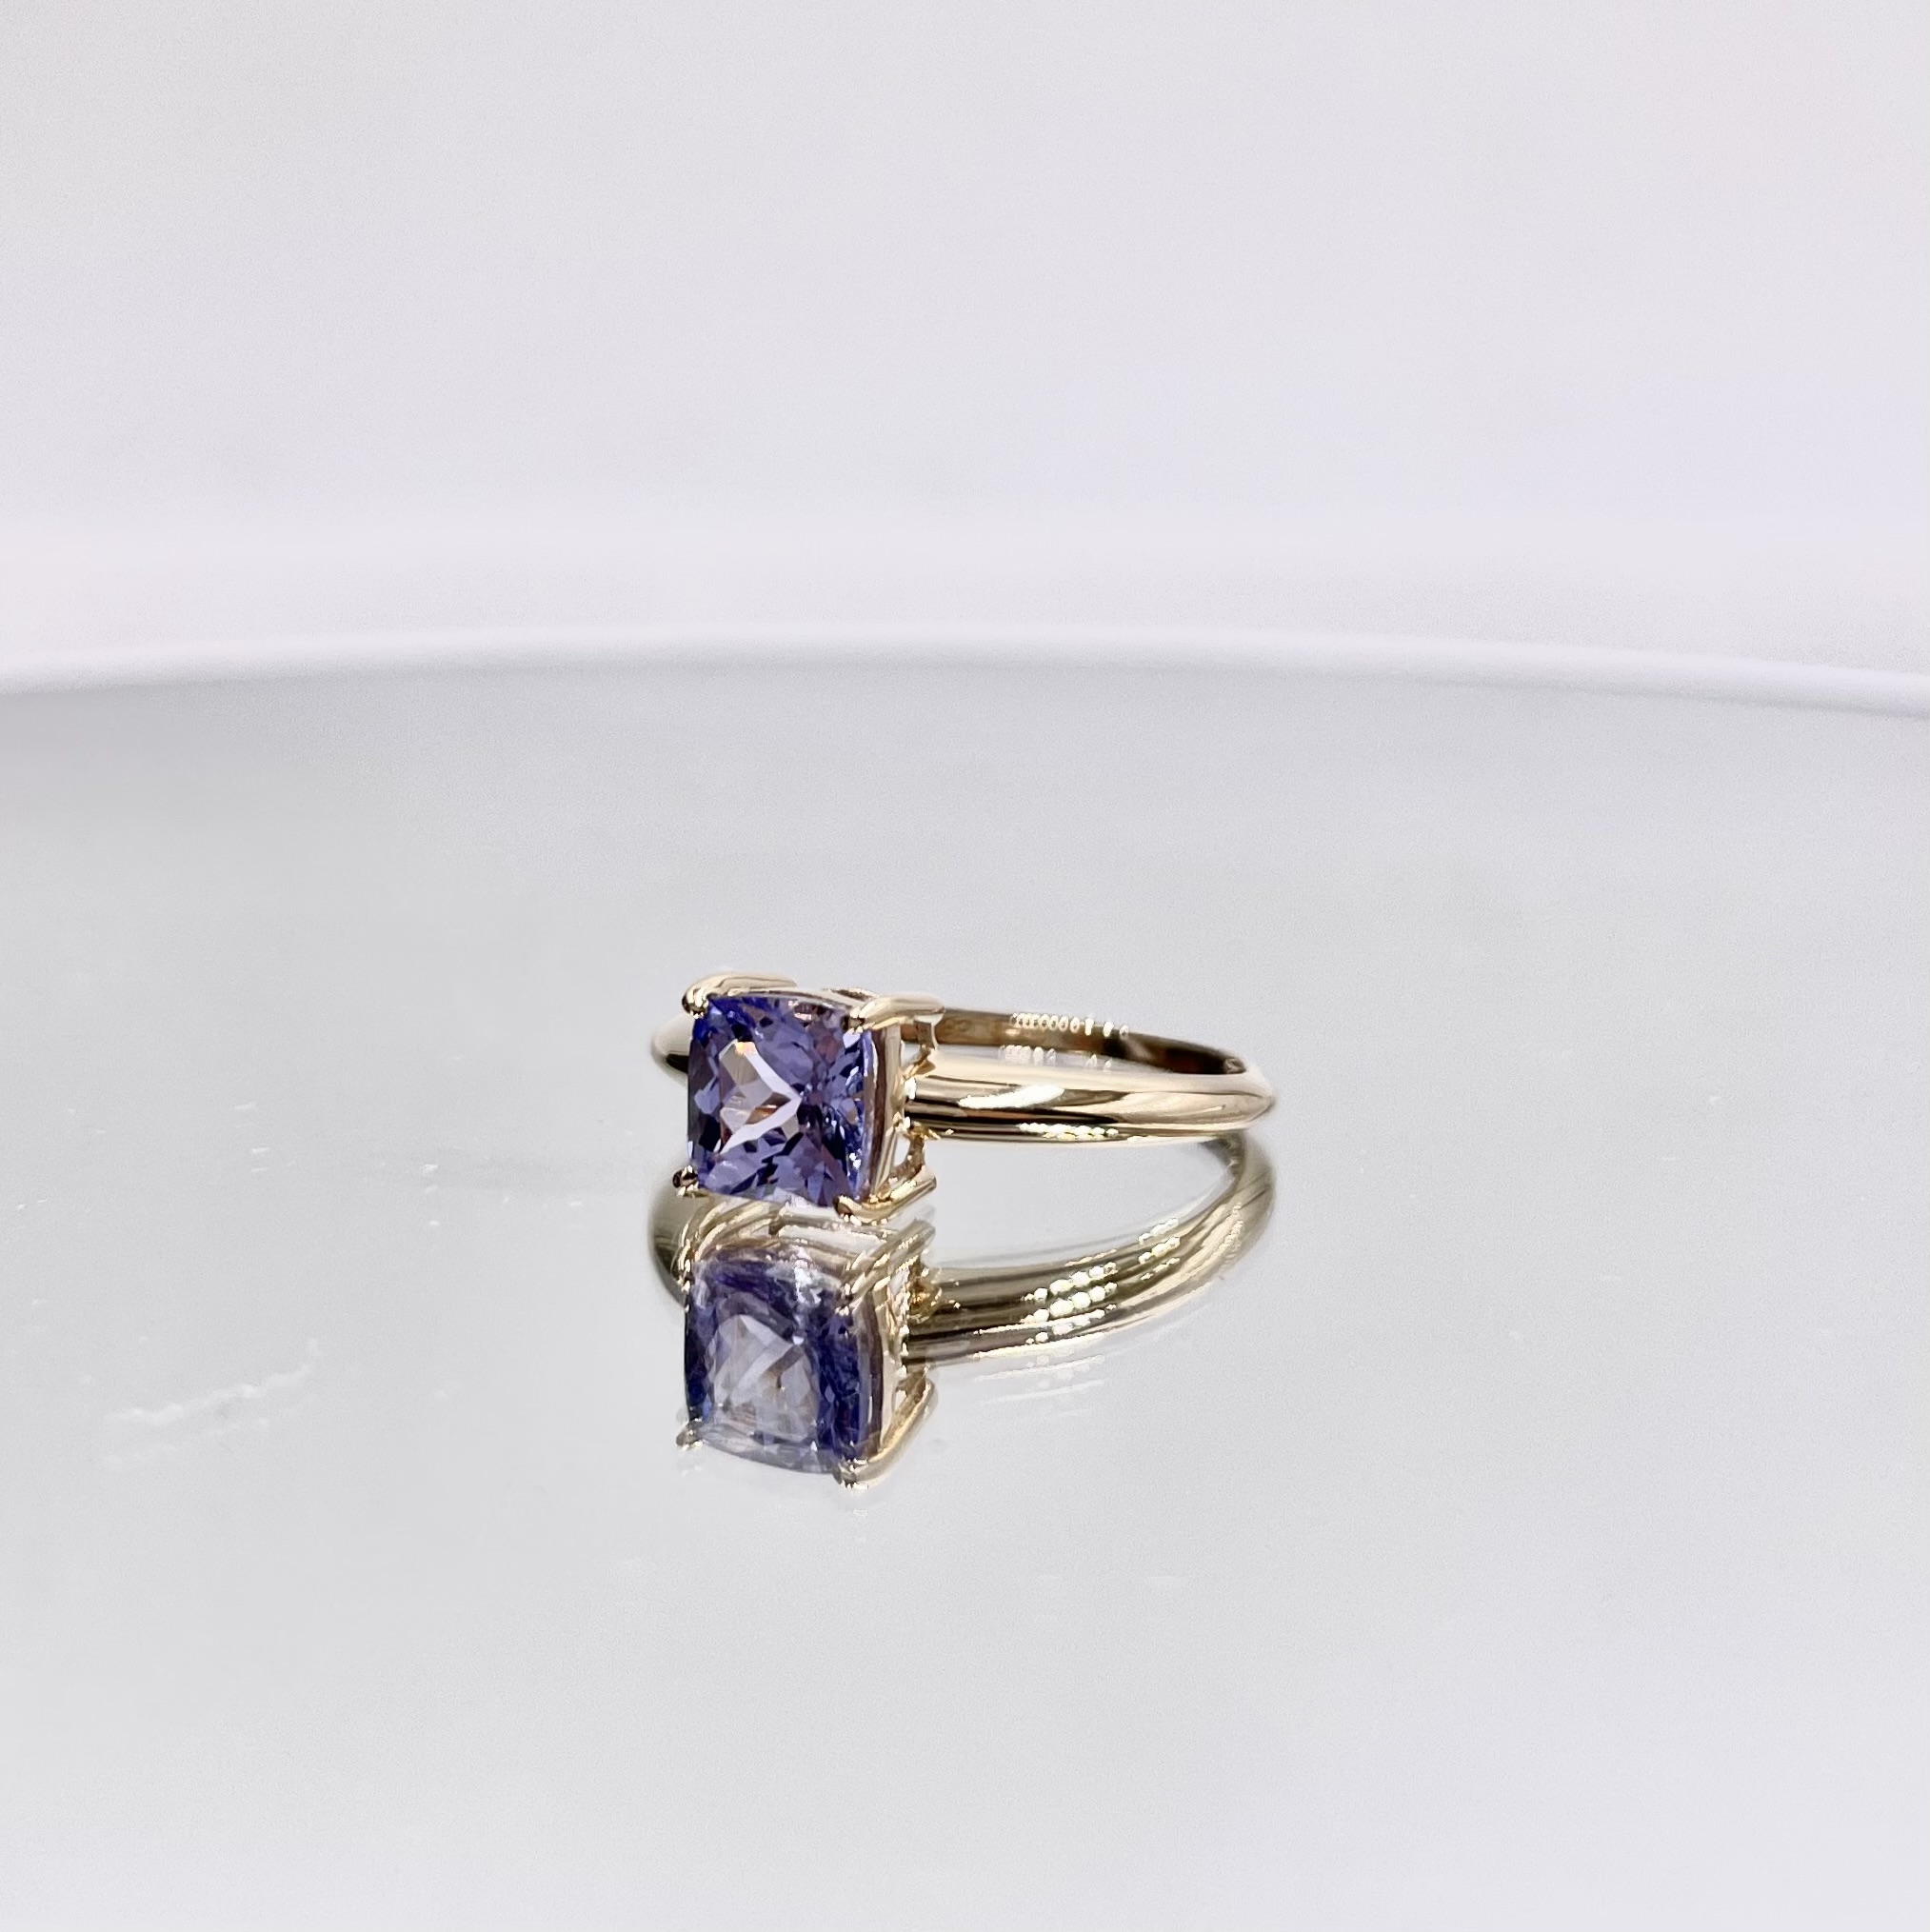 1ct Cushion Cut Tanzanite 6.0x6.0mm Yellow Gold Ring for Women Wedding Party Engagement-2